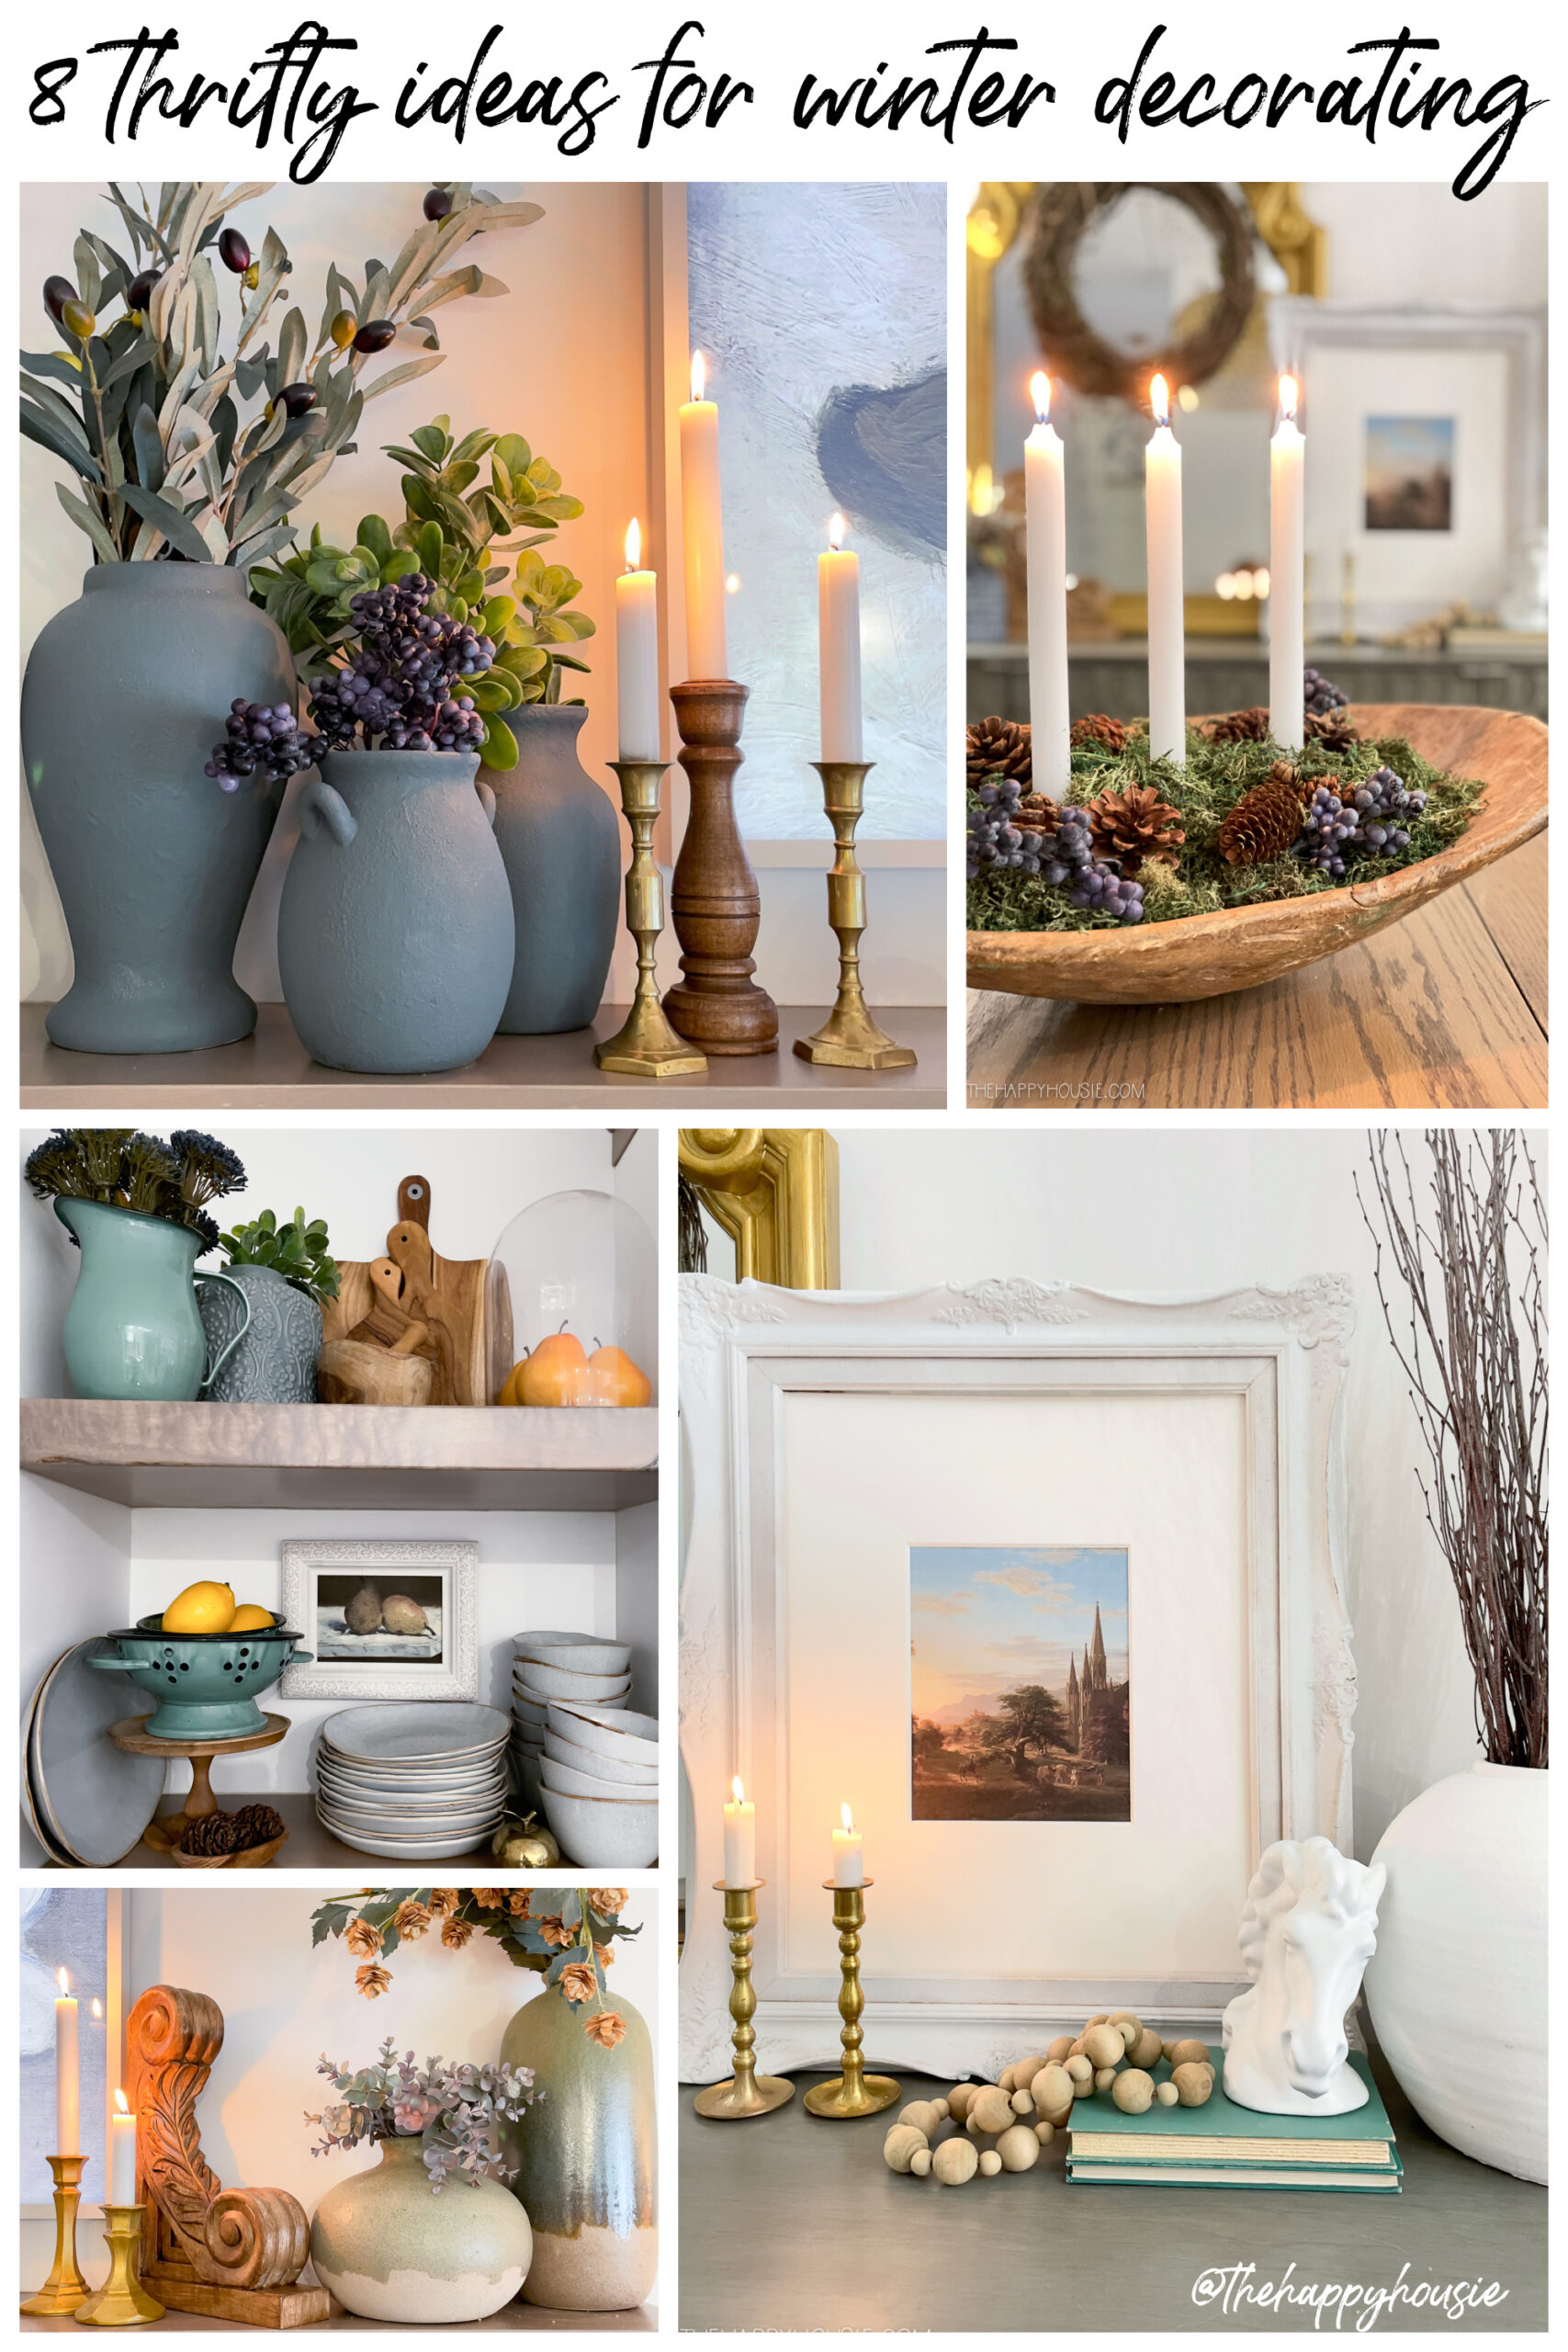 8 Thrifty Ideas For Winter Decorating poster.